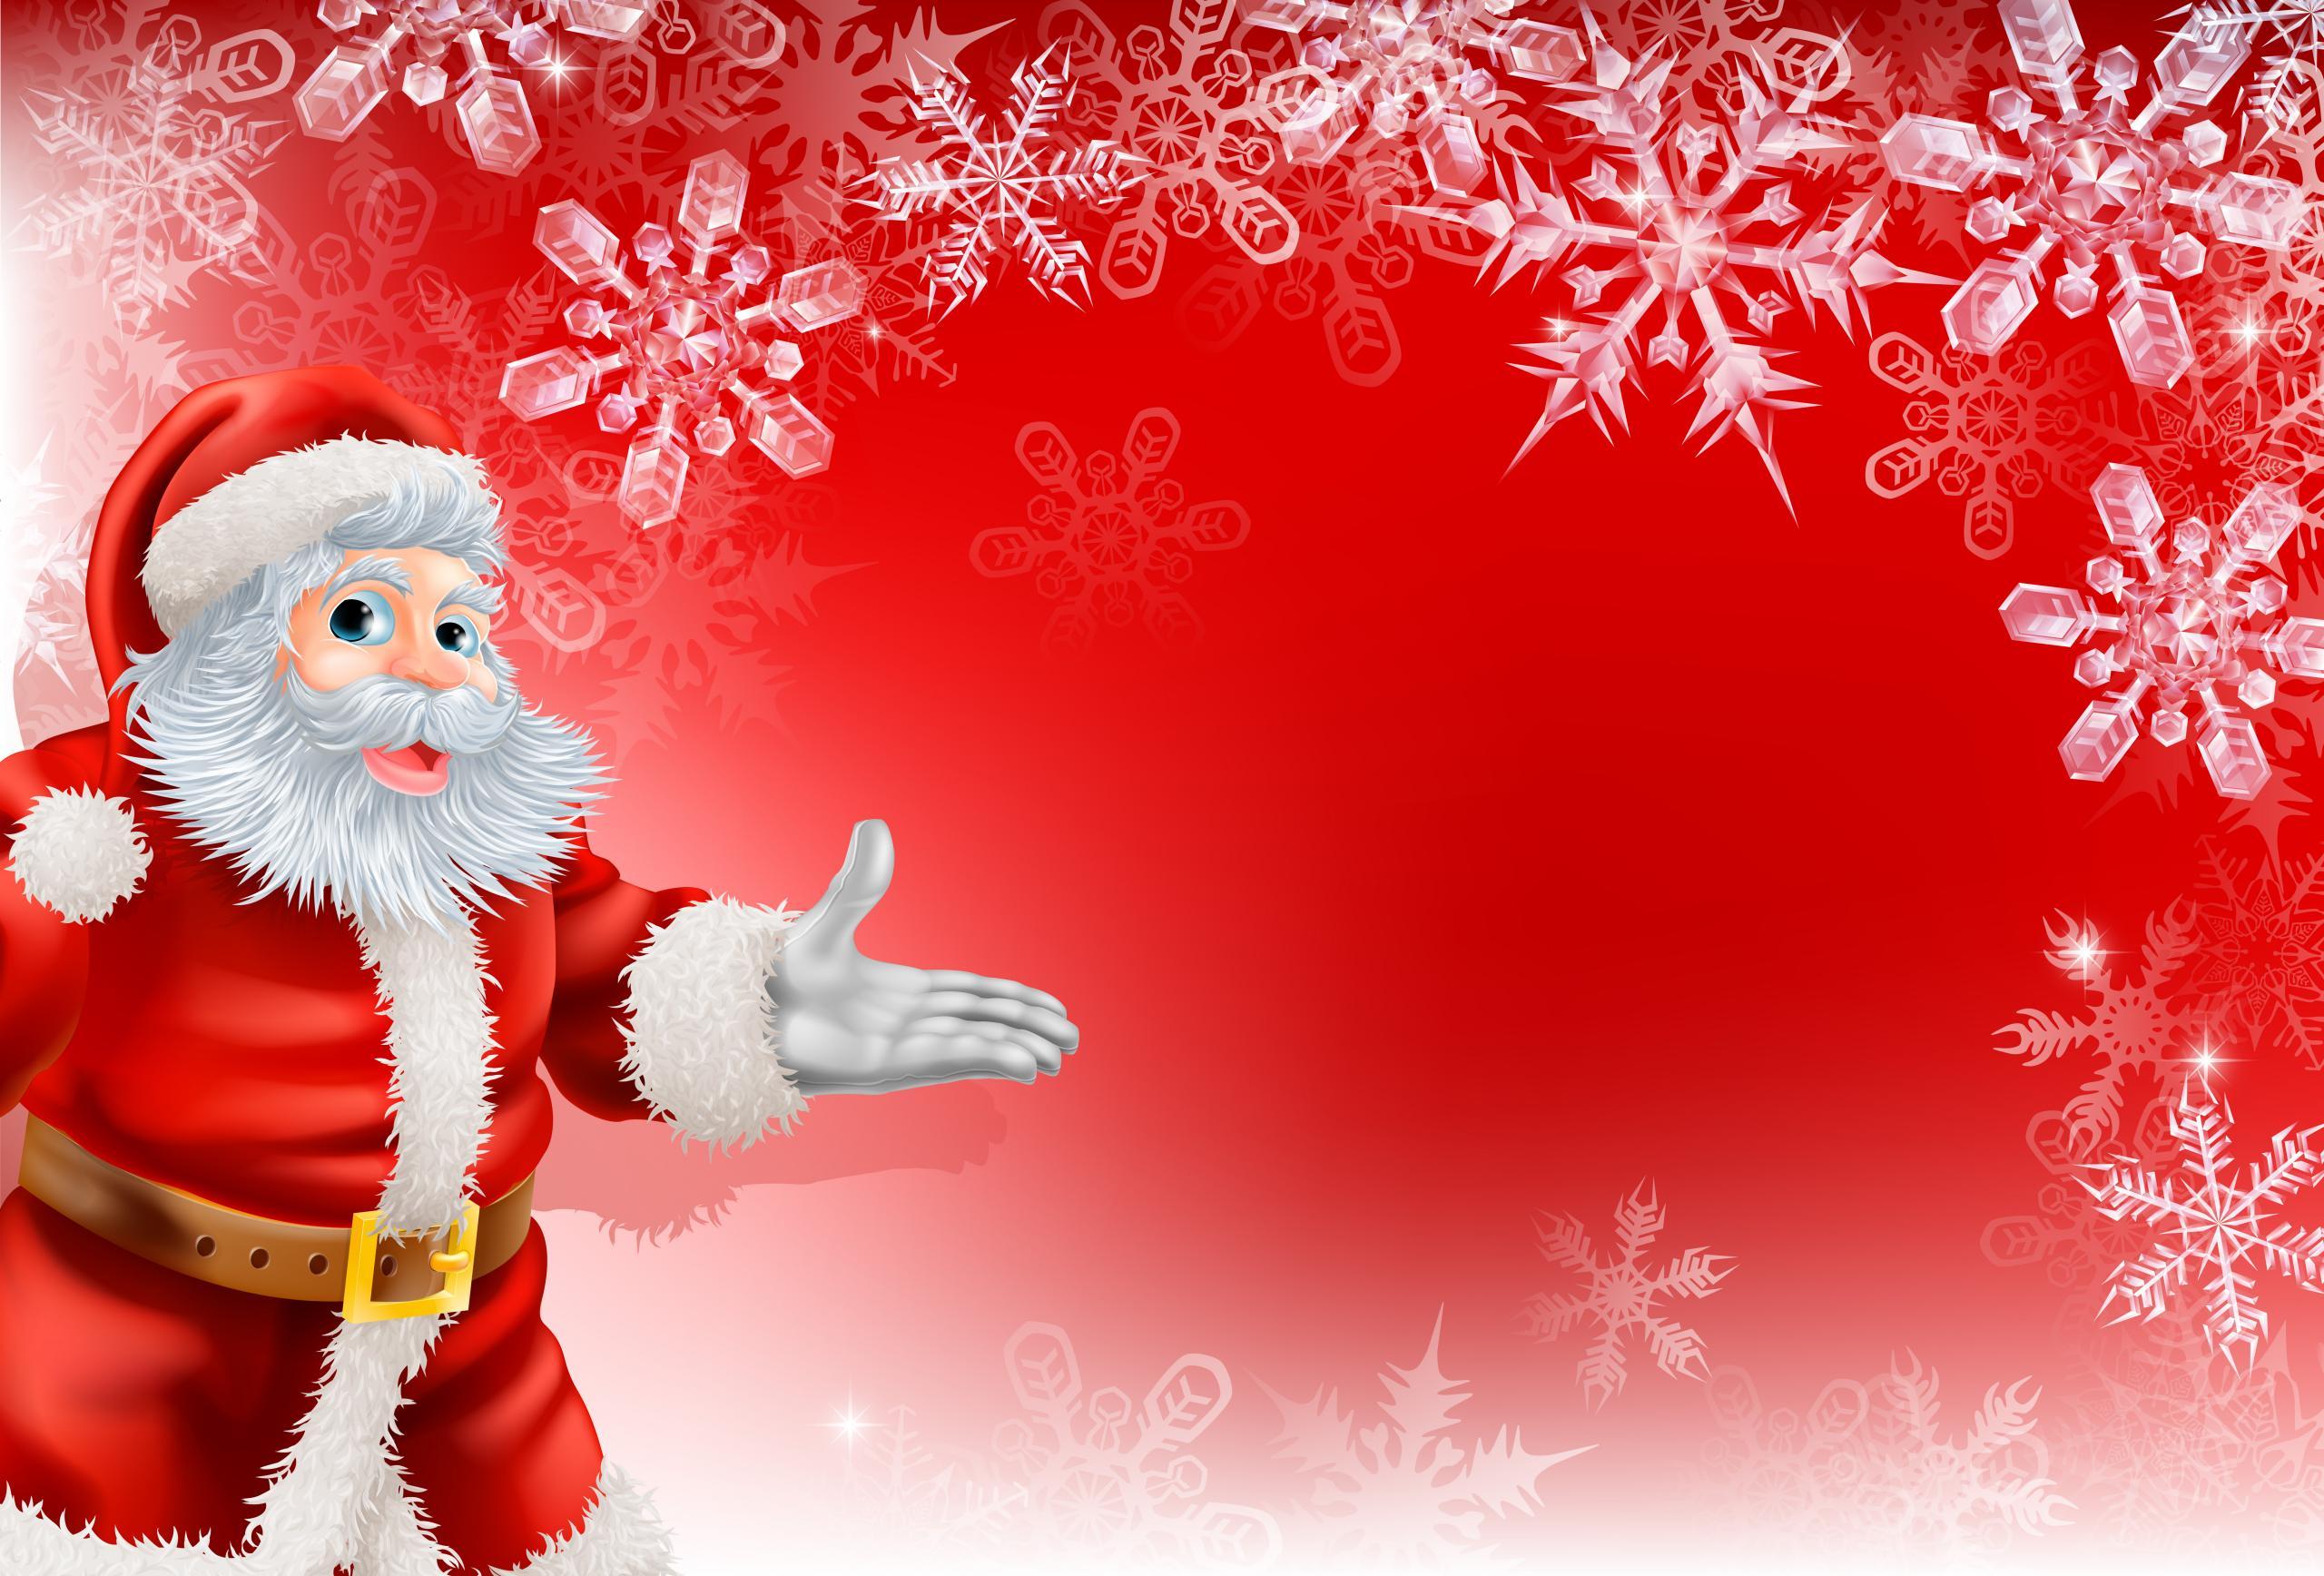 Cute Santa Merry Christmas image Background for Powerpoint